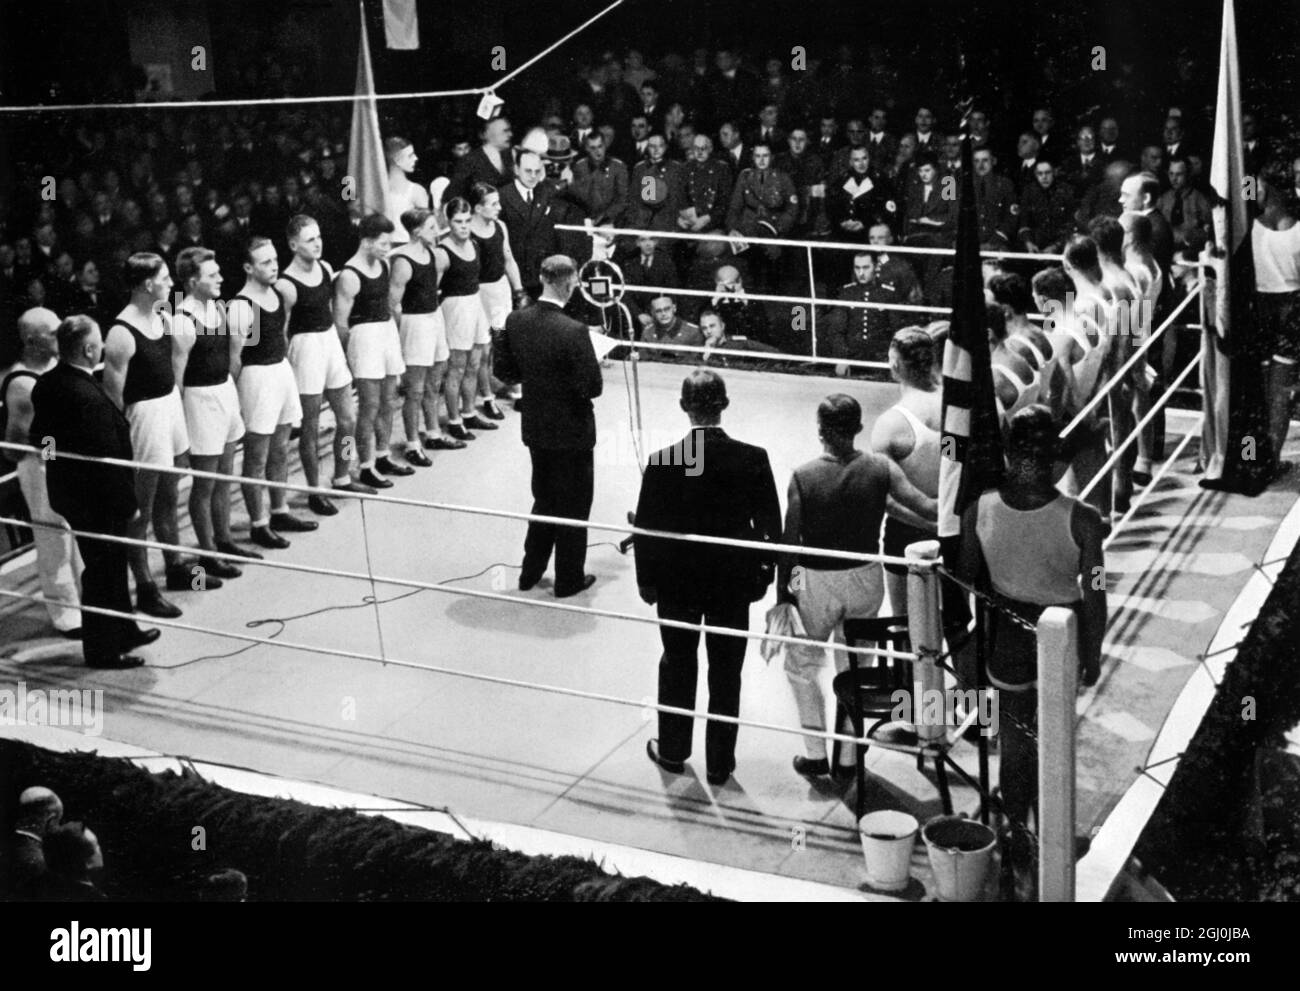 The German amateur boxers were successful in the pre-Olympic year. Here are seen the teams lined upto be presented ..... Germany - Poland - Germany triumphed 10:6. ©TopFoto *** Local Caption *** Stock Photo